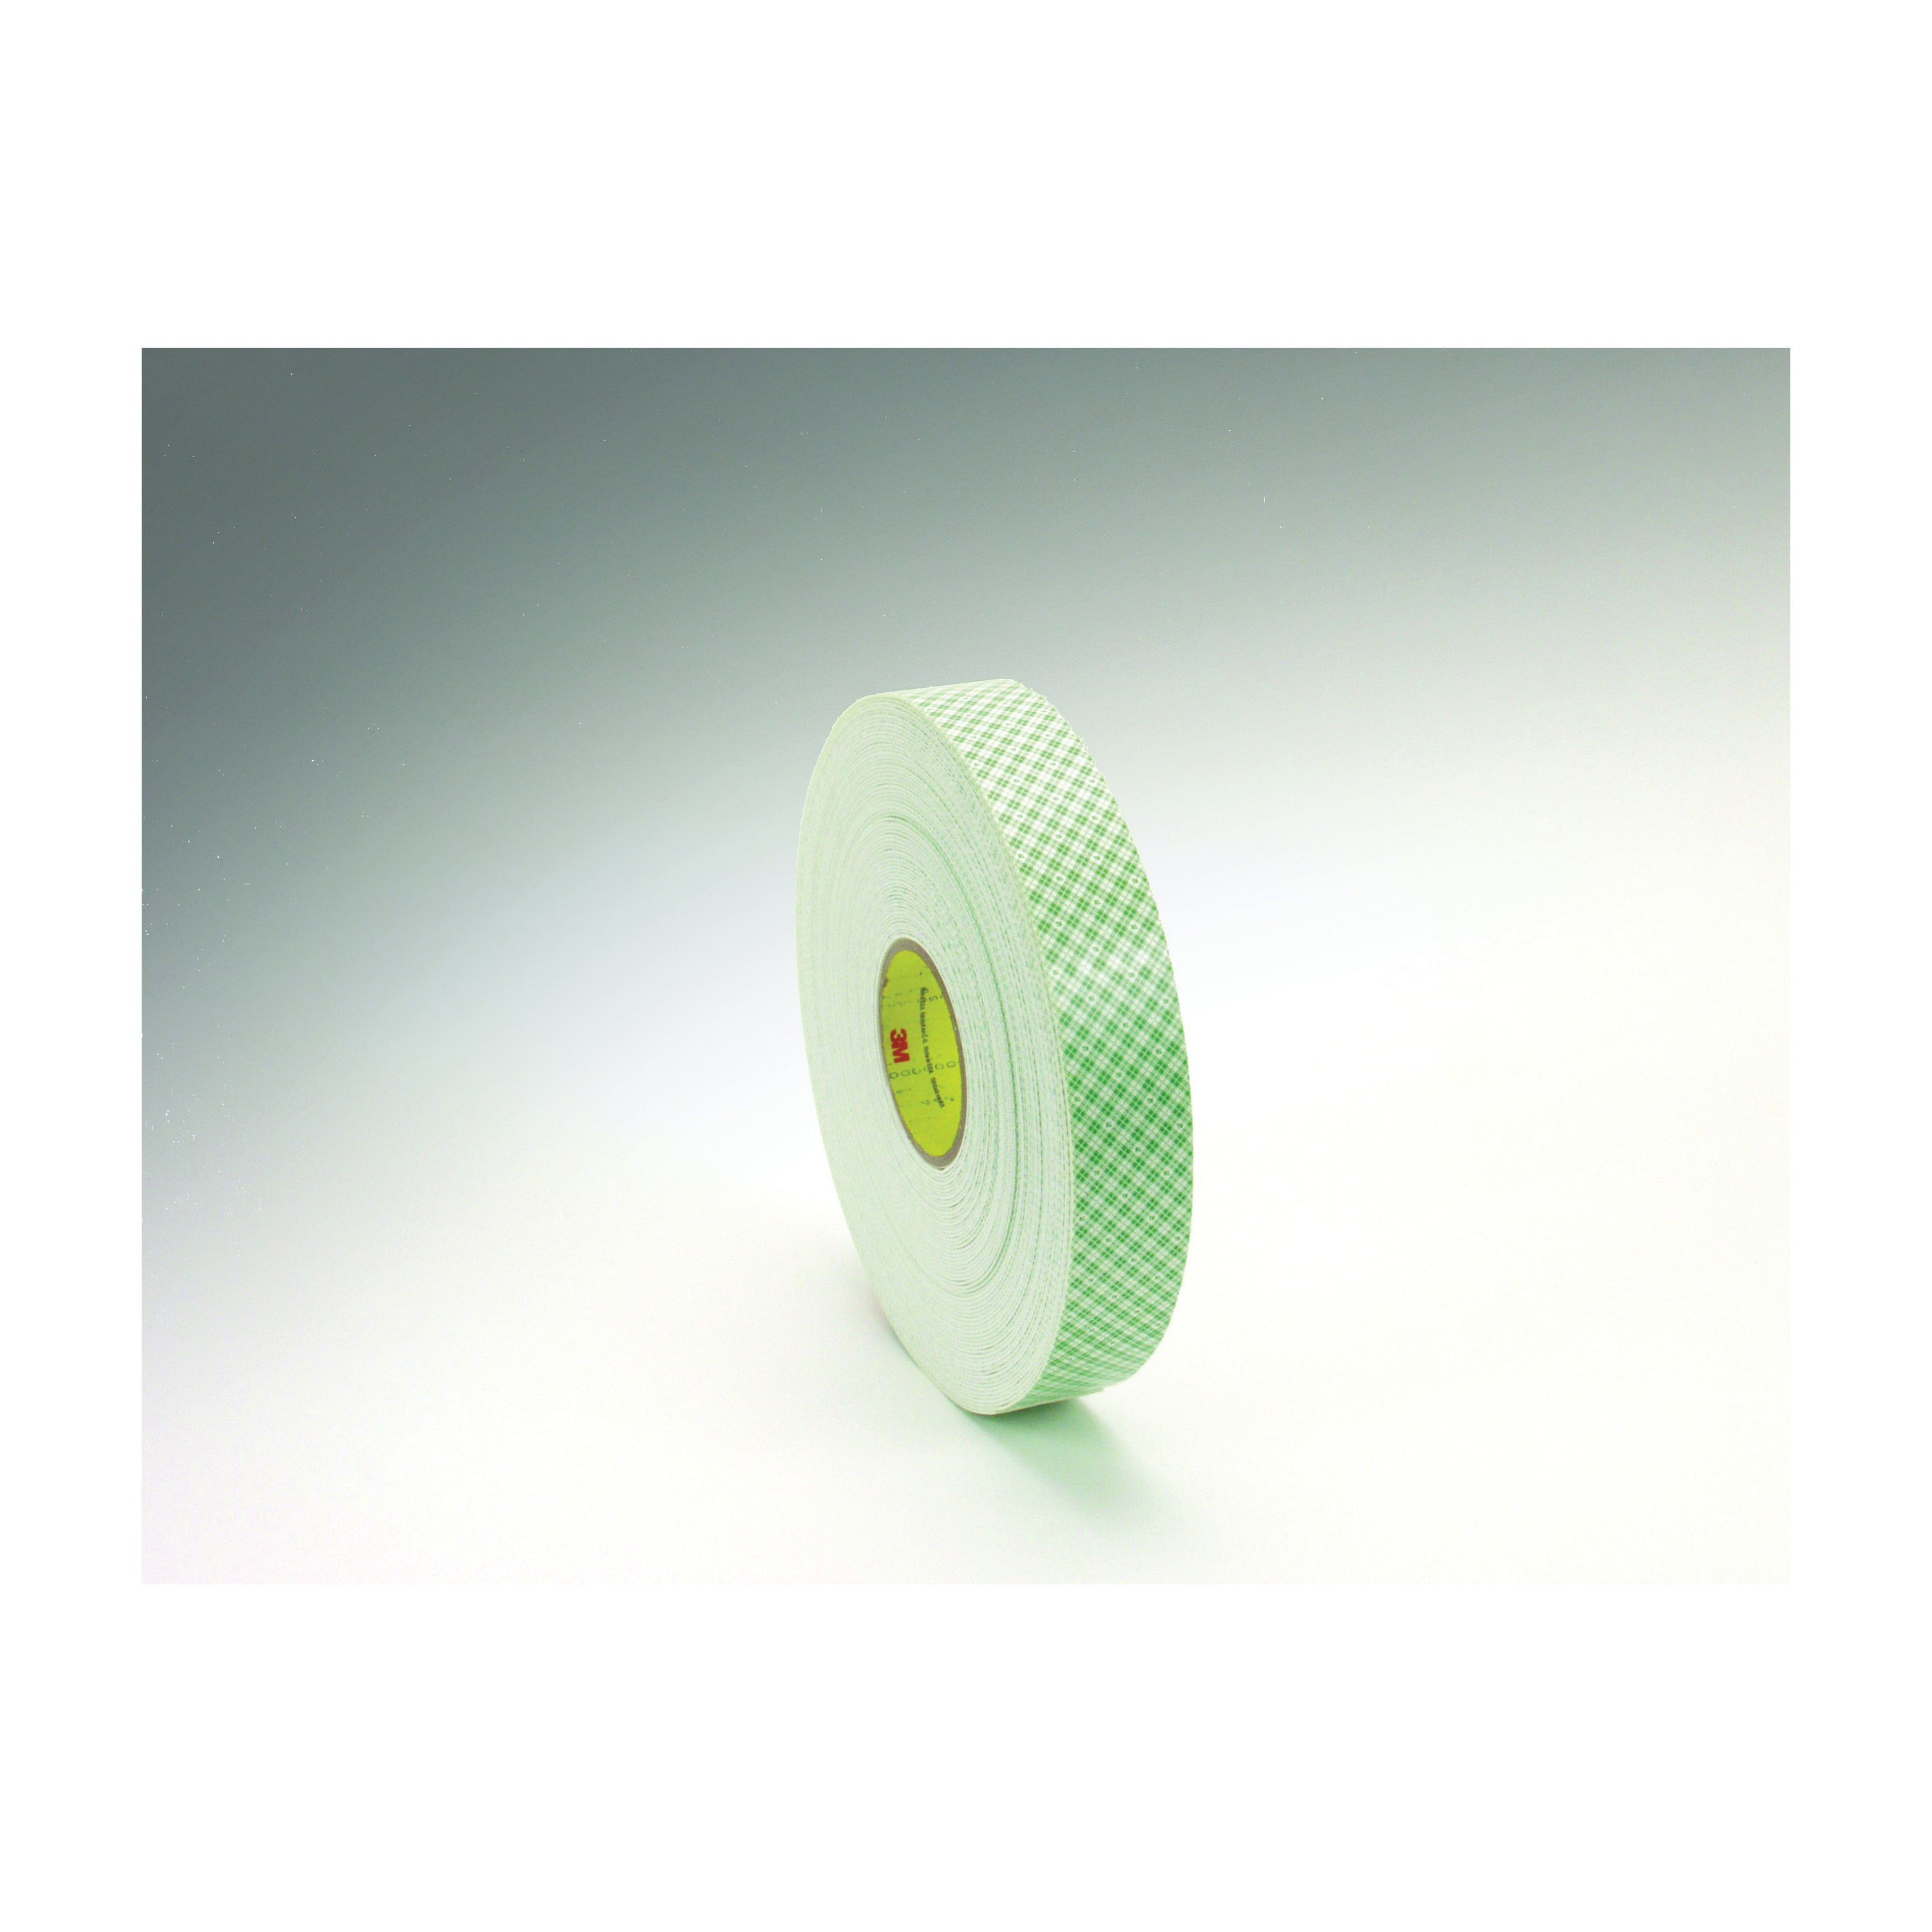 3M™ 021200-03372 Double Coated Tape, 36 yd L x 3/8 in W, 62 mil THK, Acrylic Adhesive, Urethane Foam Backing, Off-White